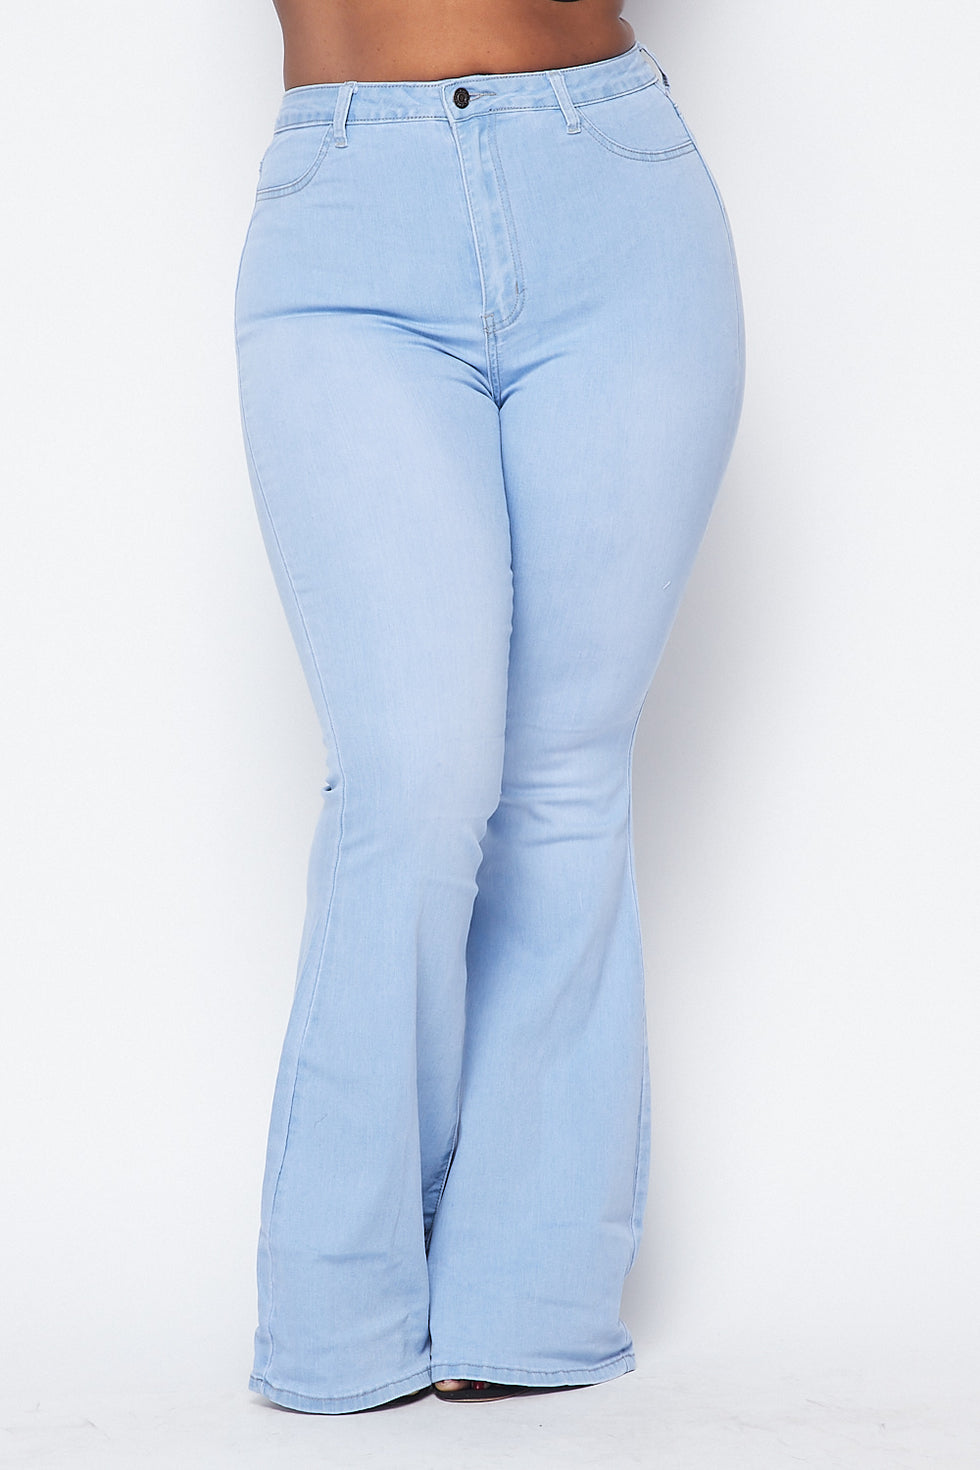 Plus Size High Waisted Stretchy Bell Bottom Jeans - Light Denim ...